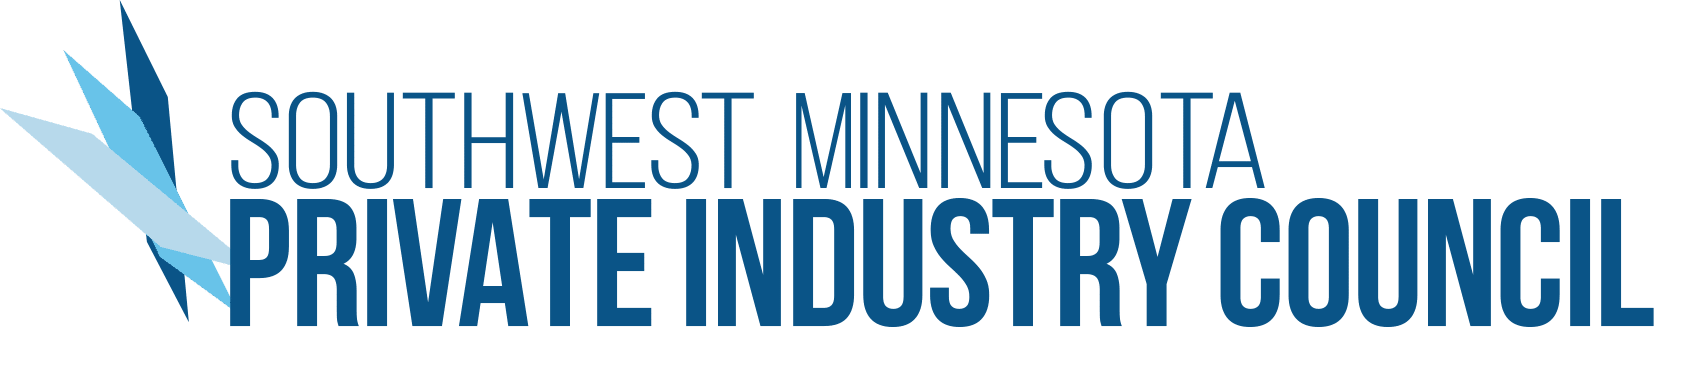 Southwest Minnesota Private Industry Council Logo With Footer